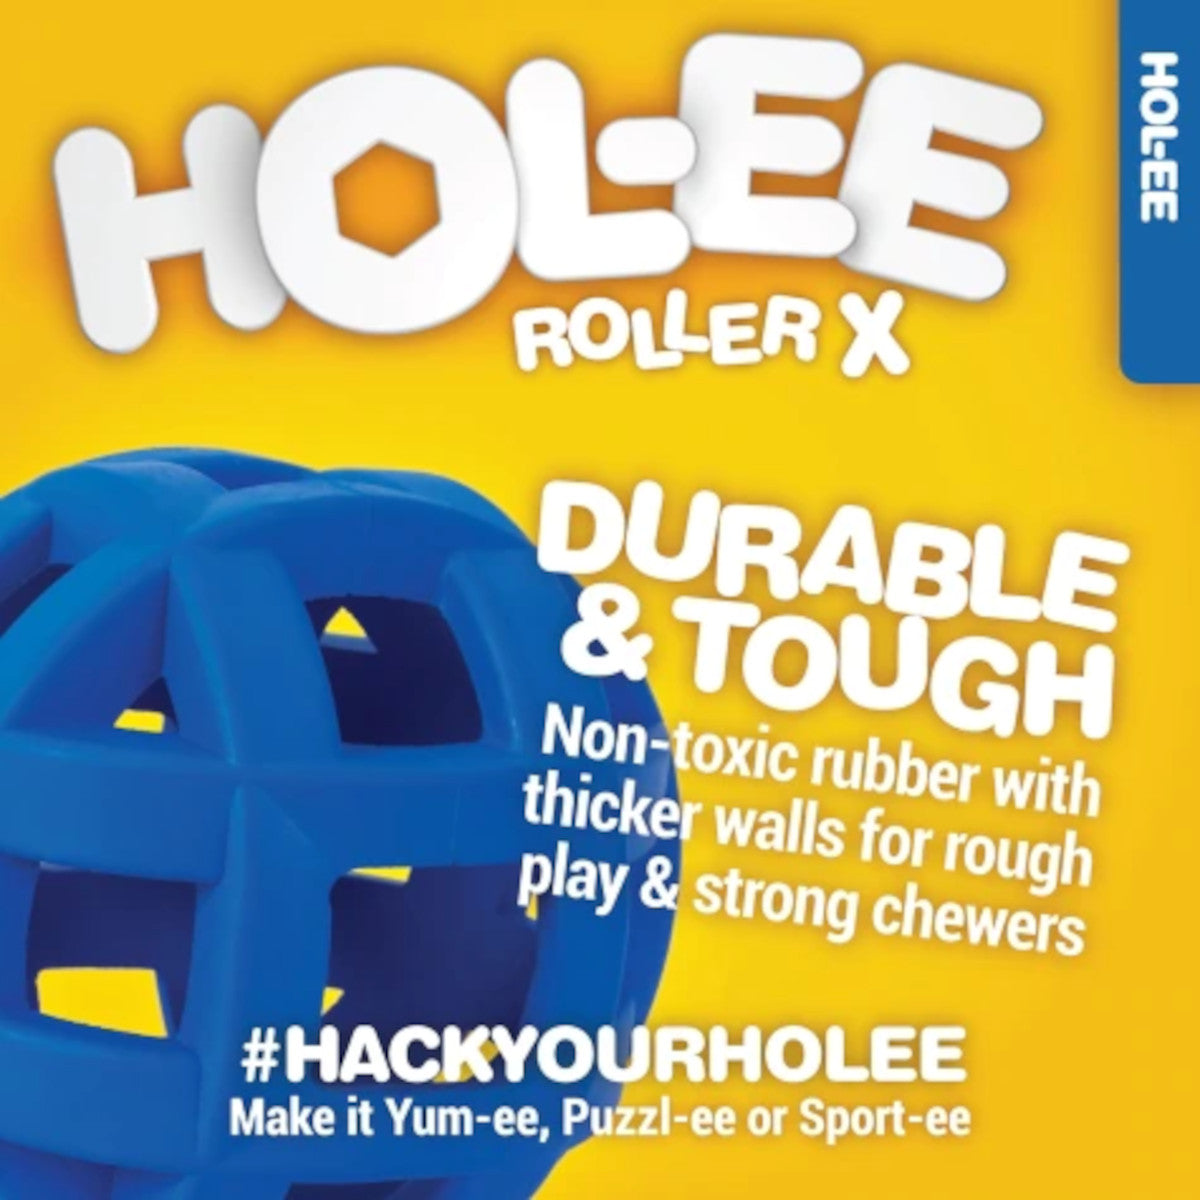 JW Hol-ee Roller X - Non-Toxic Durable Rubber Dog Toy.